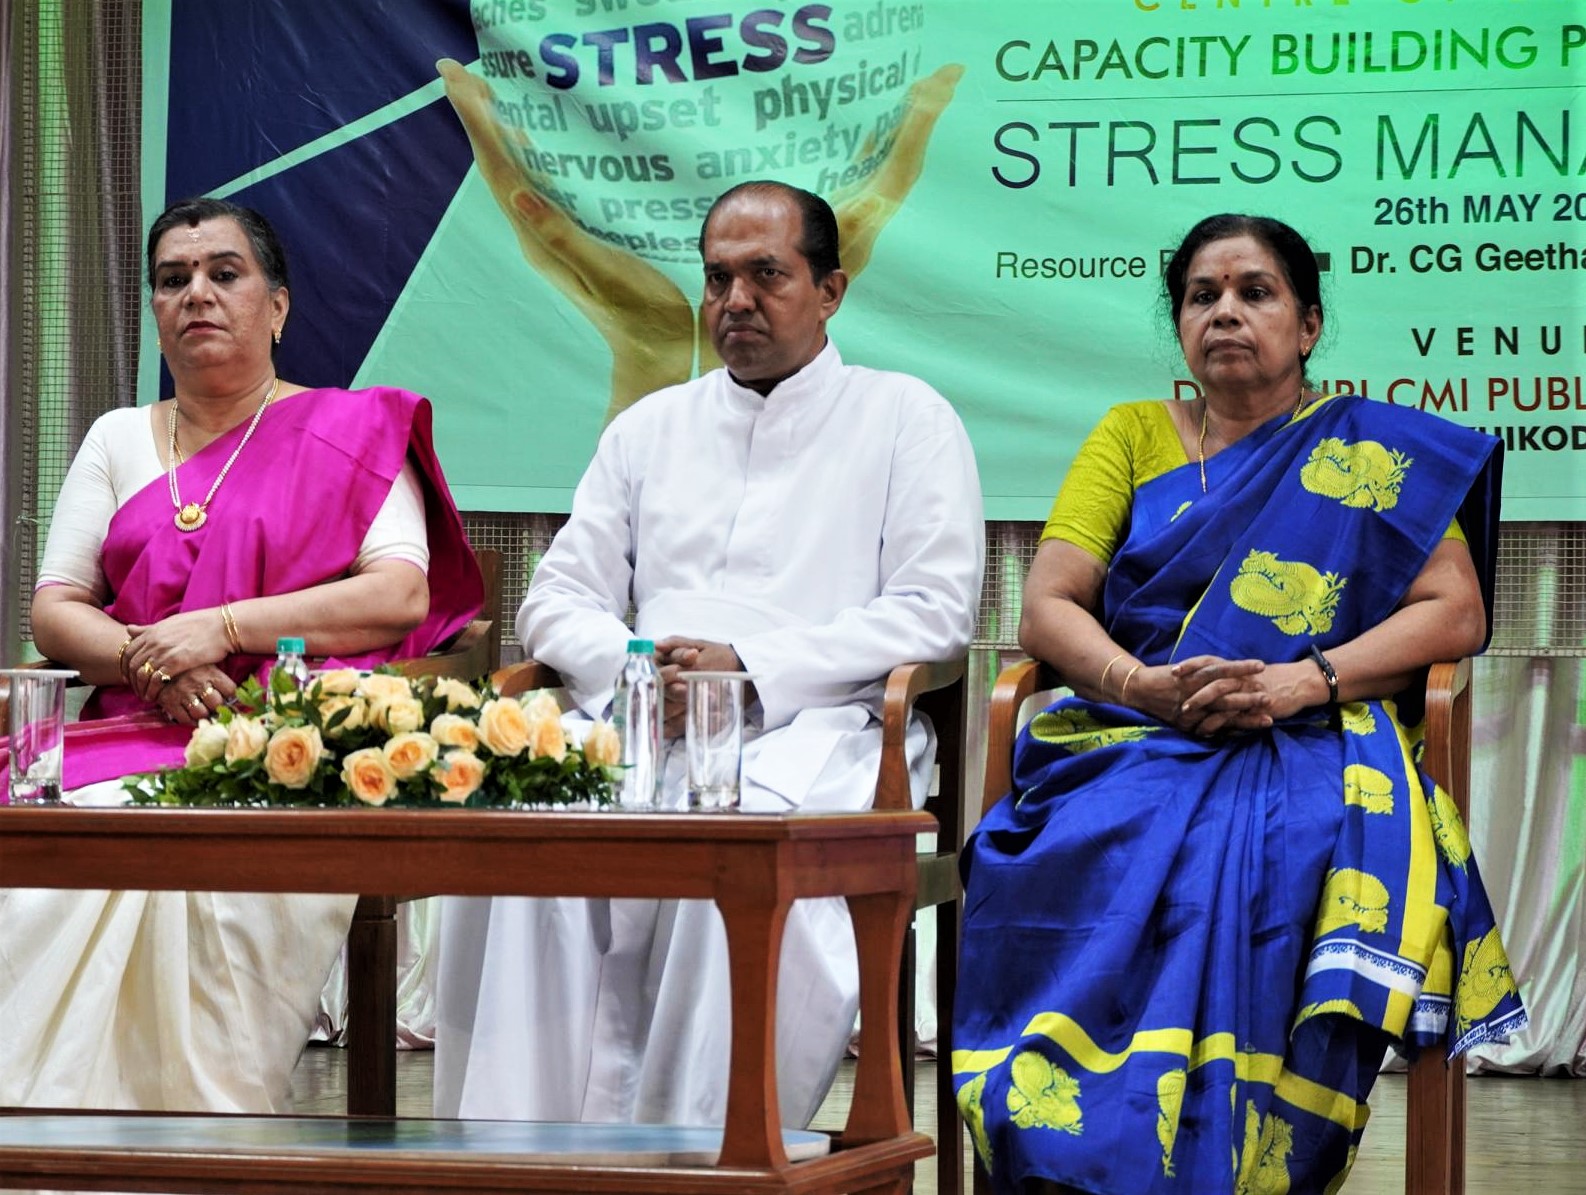 Capacity Building Programme on Stress Management